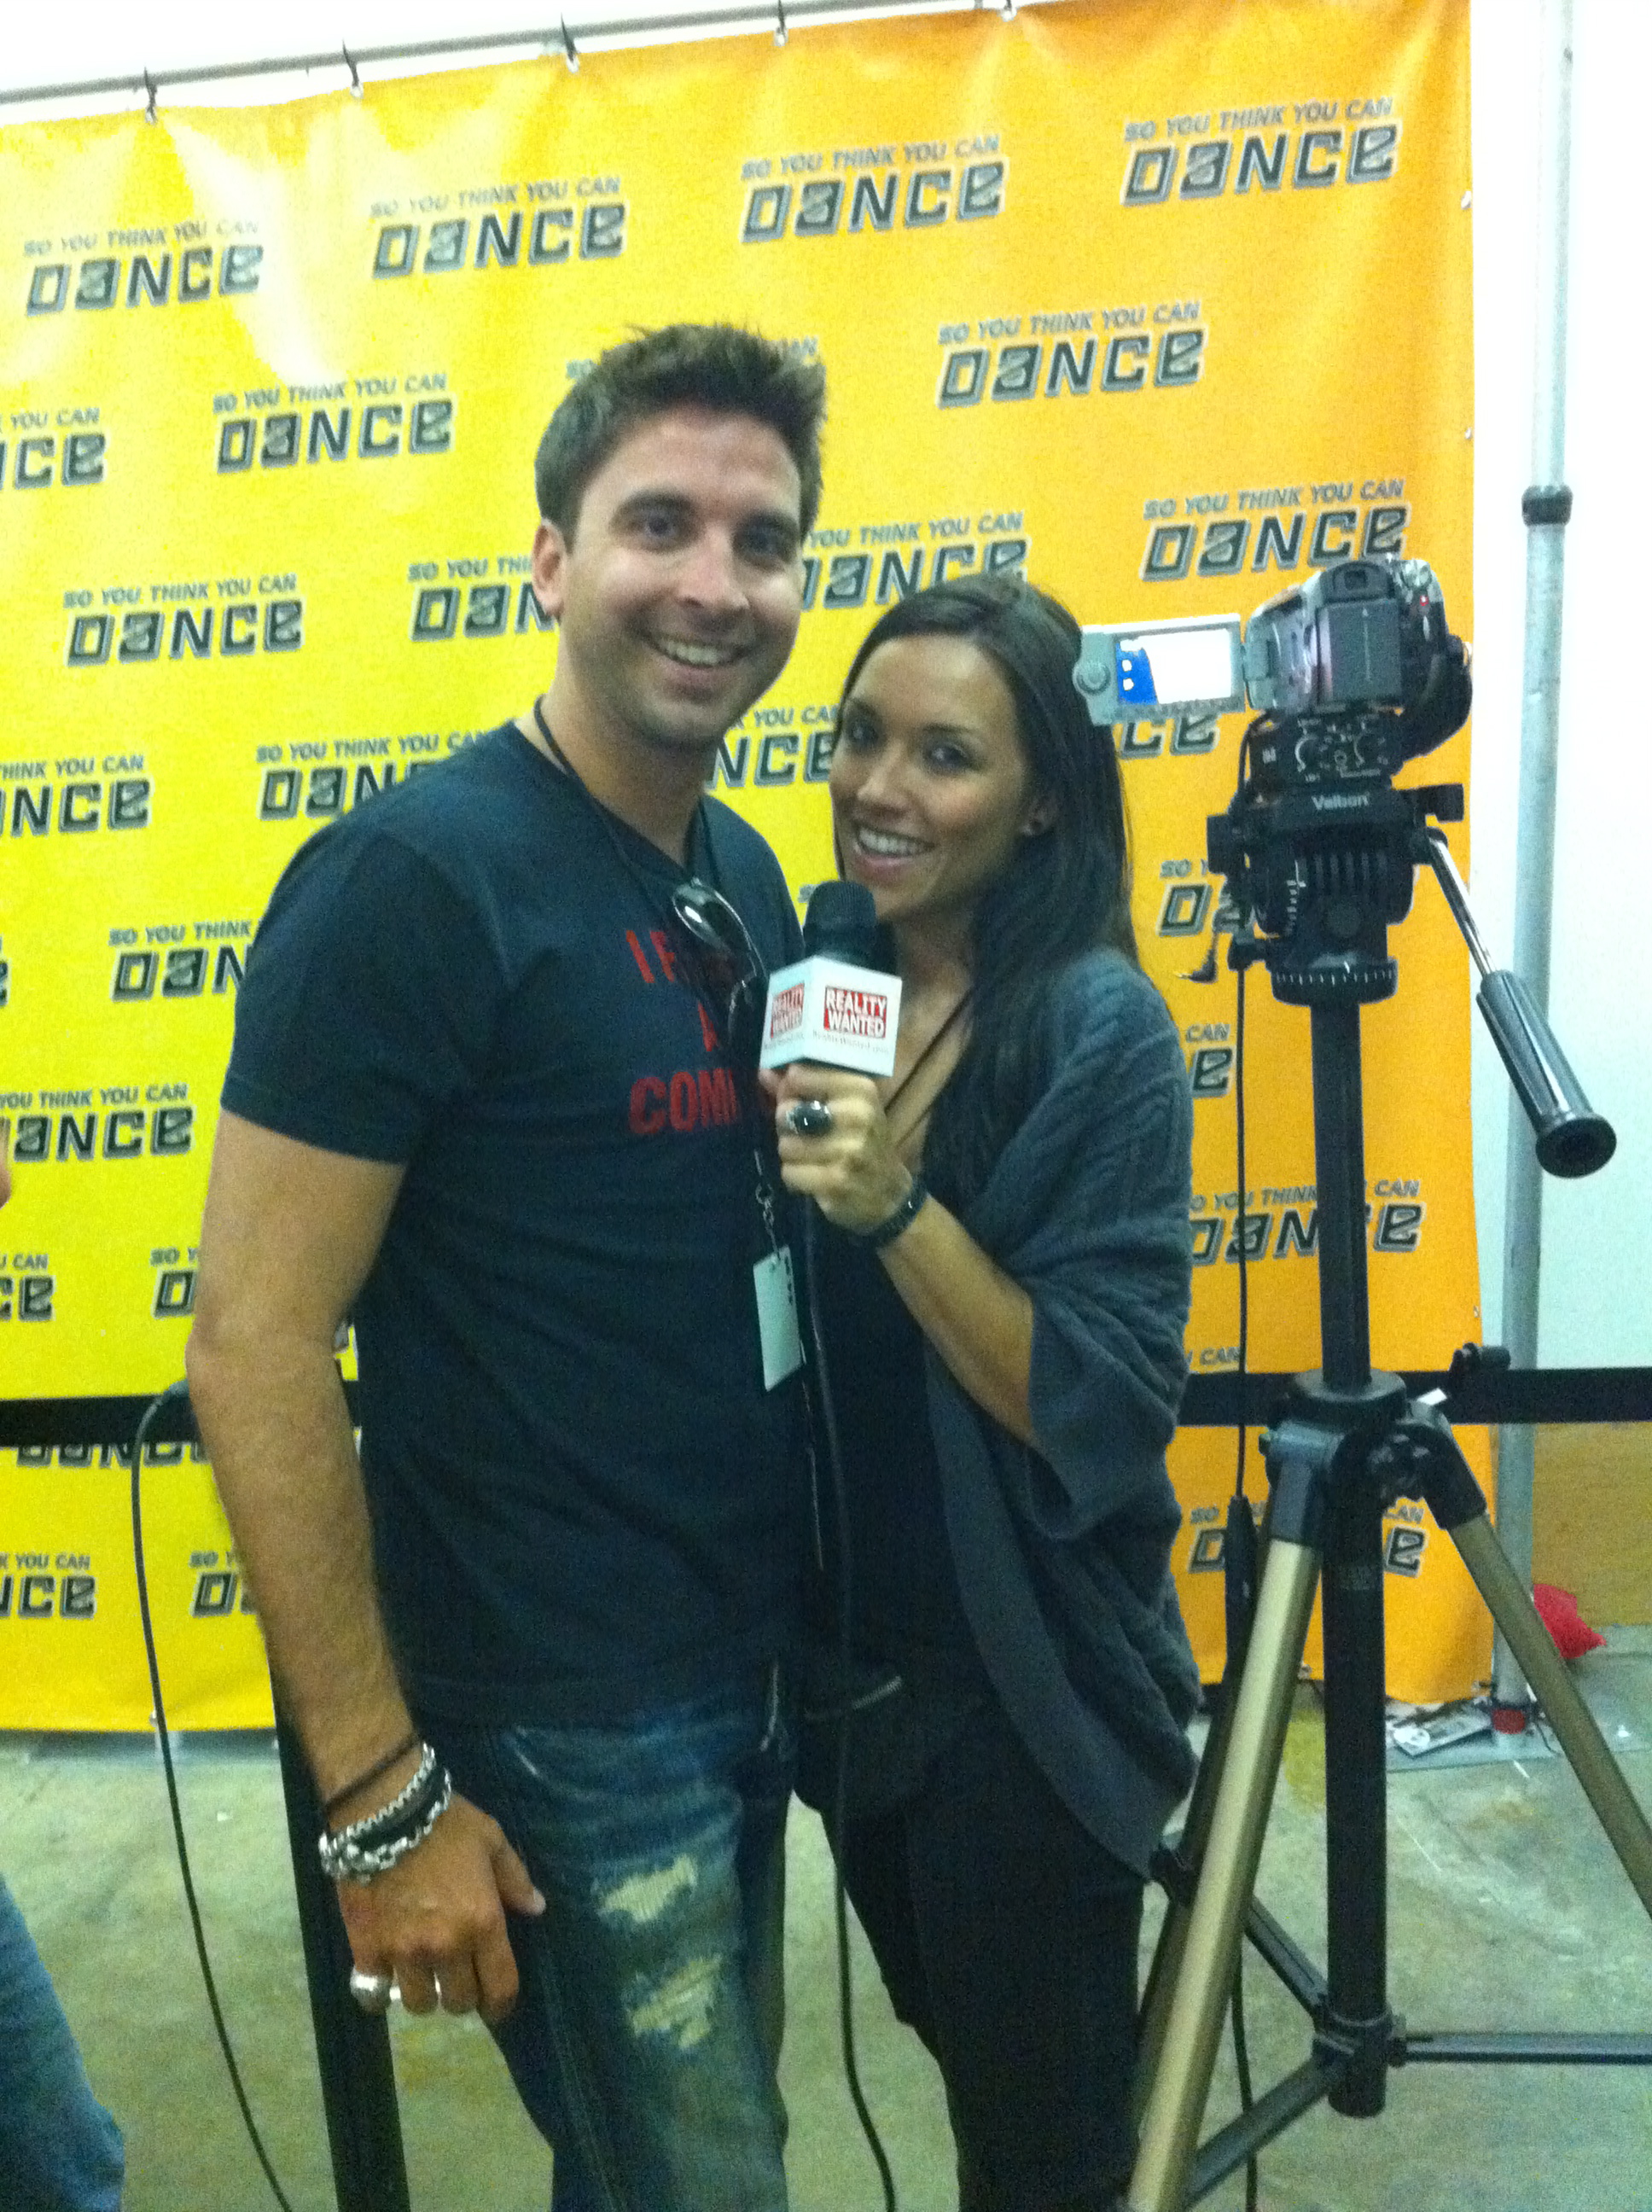 Behind the scenes for RealityWanted at So You Think You Can Dance!